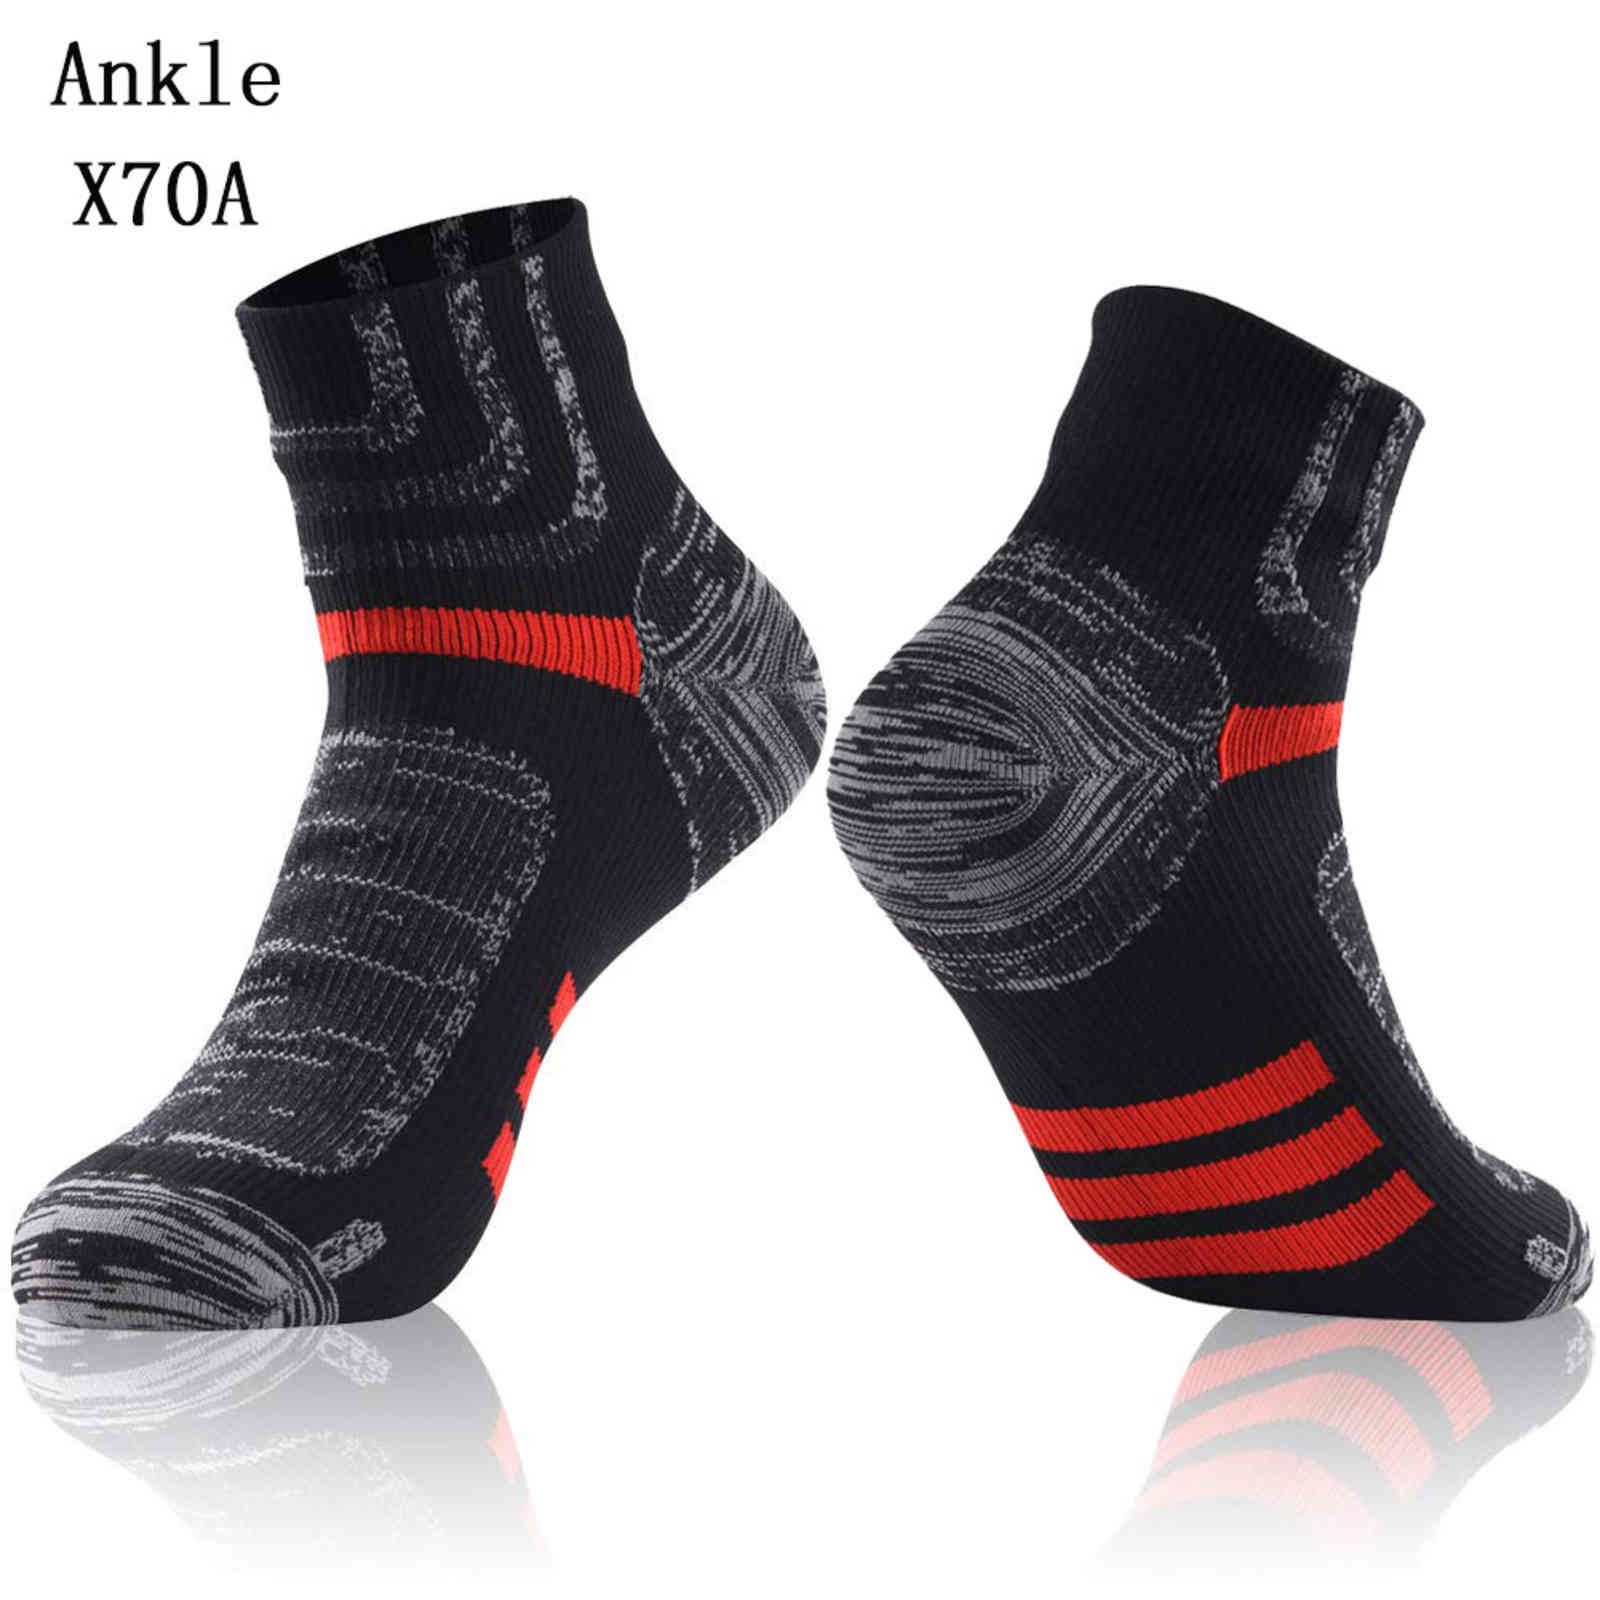 Ankle X70a